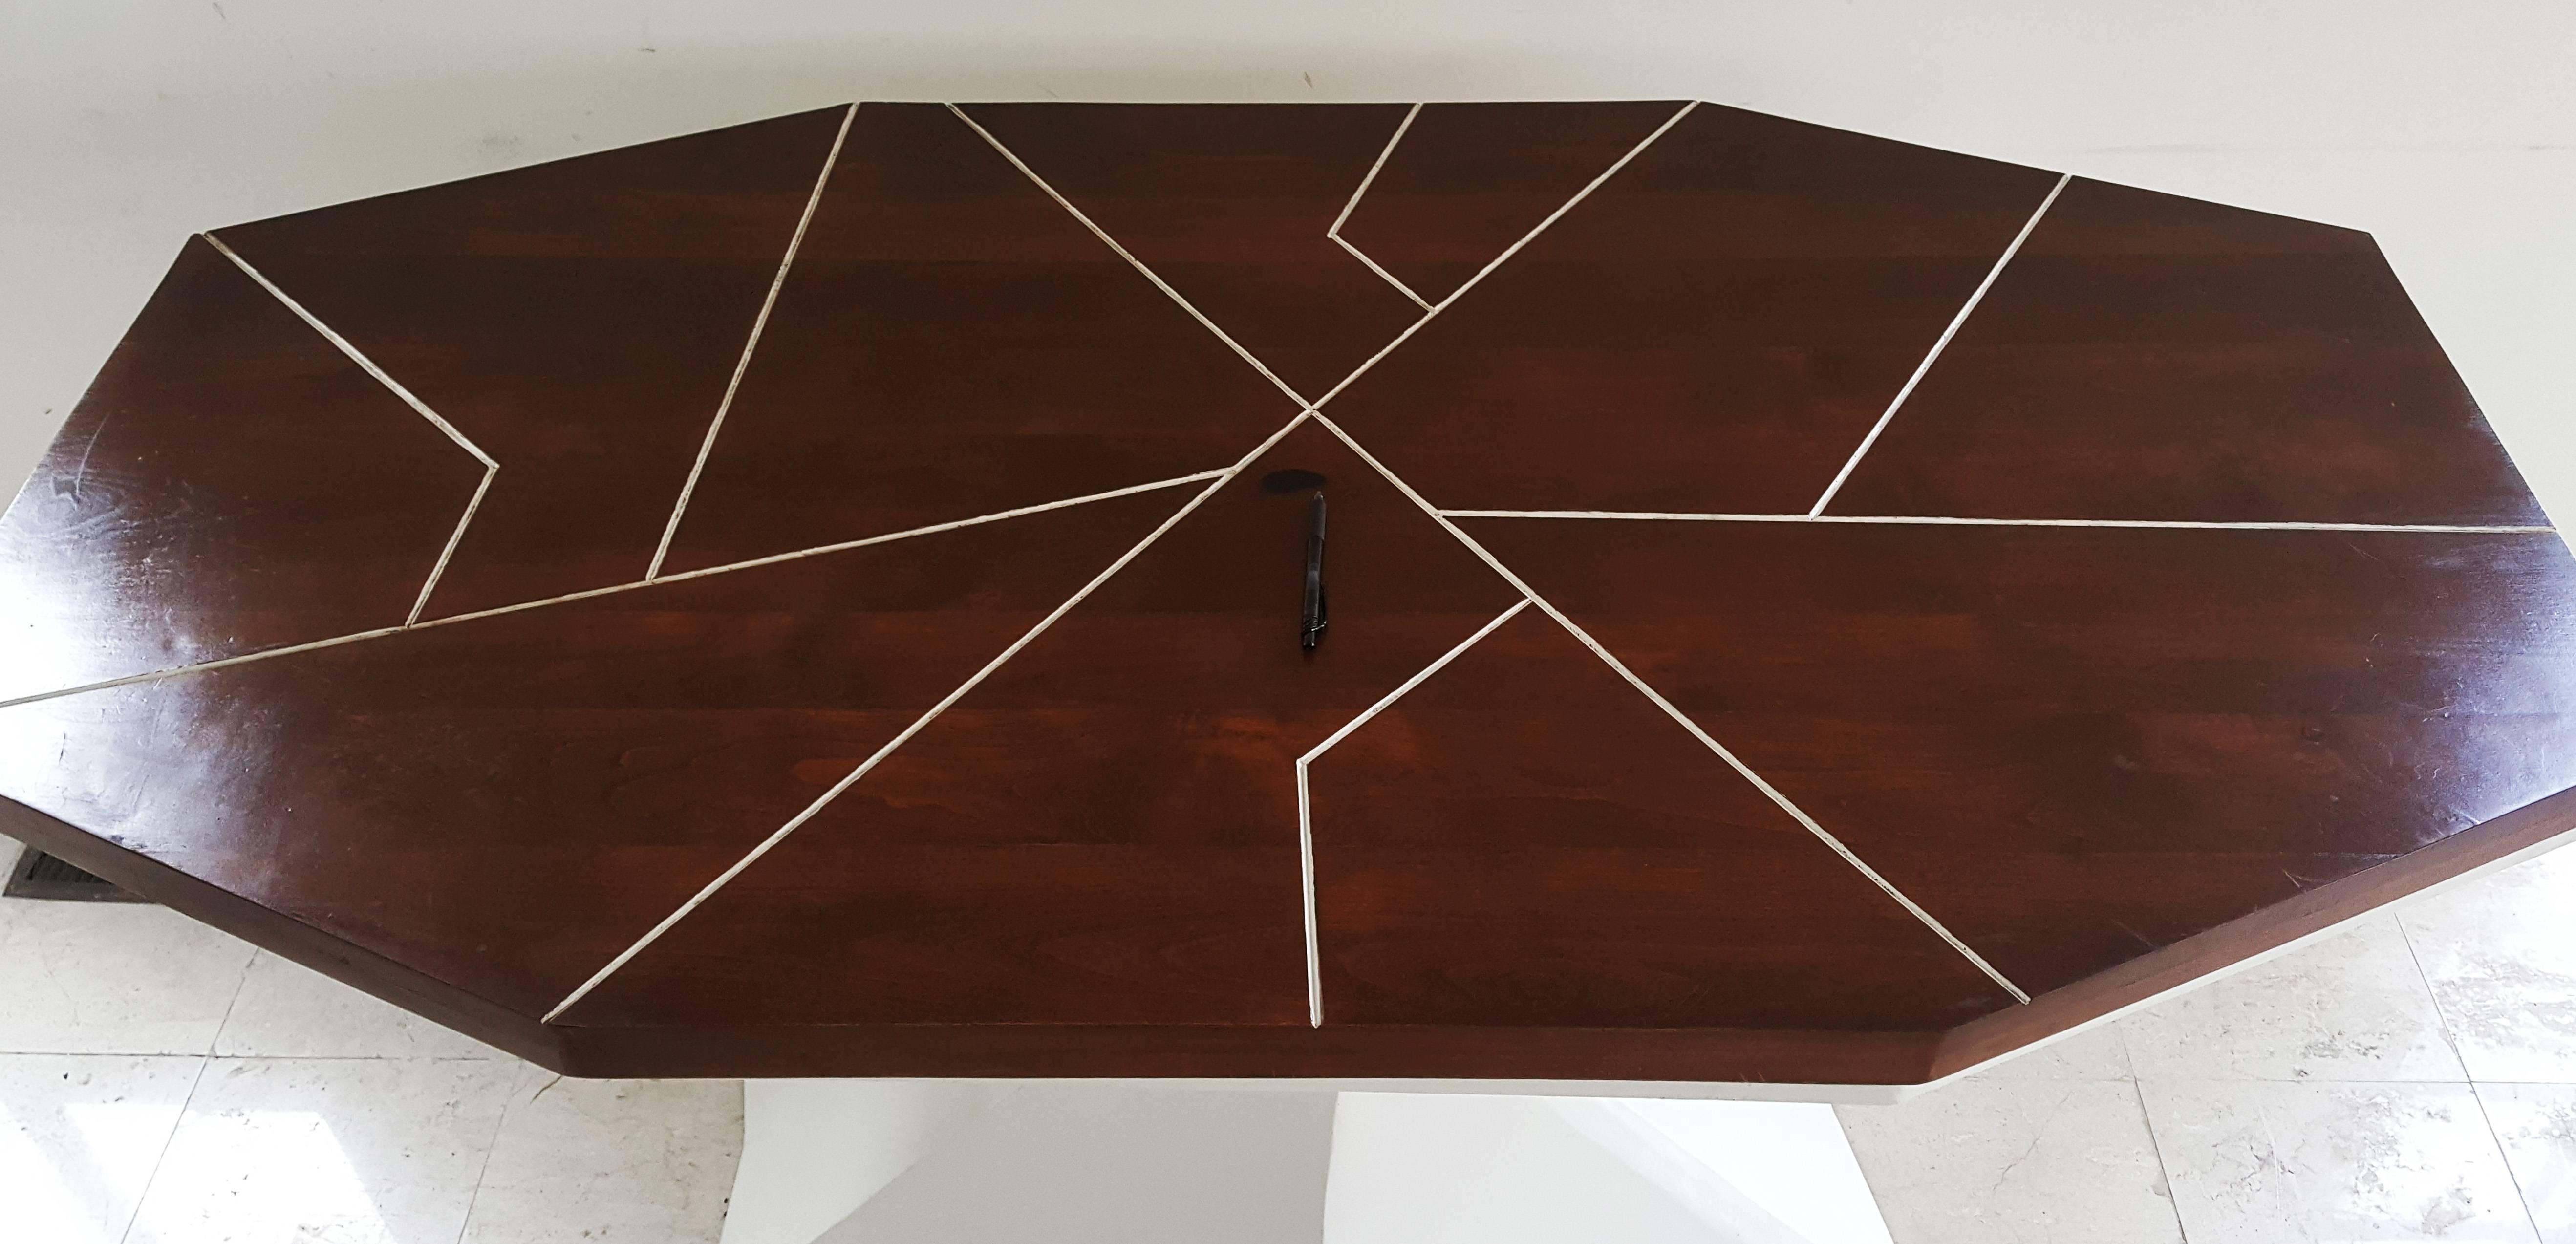 A stunning original design by Alberto Vieyra, "White Dining Table" is a stunning modern "white veined" dining table with a lacquered asymmetrical base. Could also be used as a desk or display table.